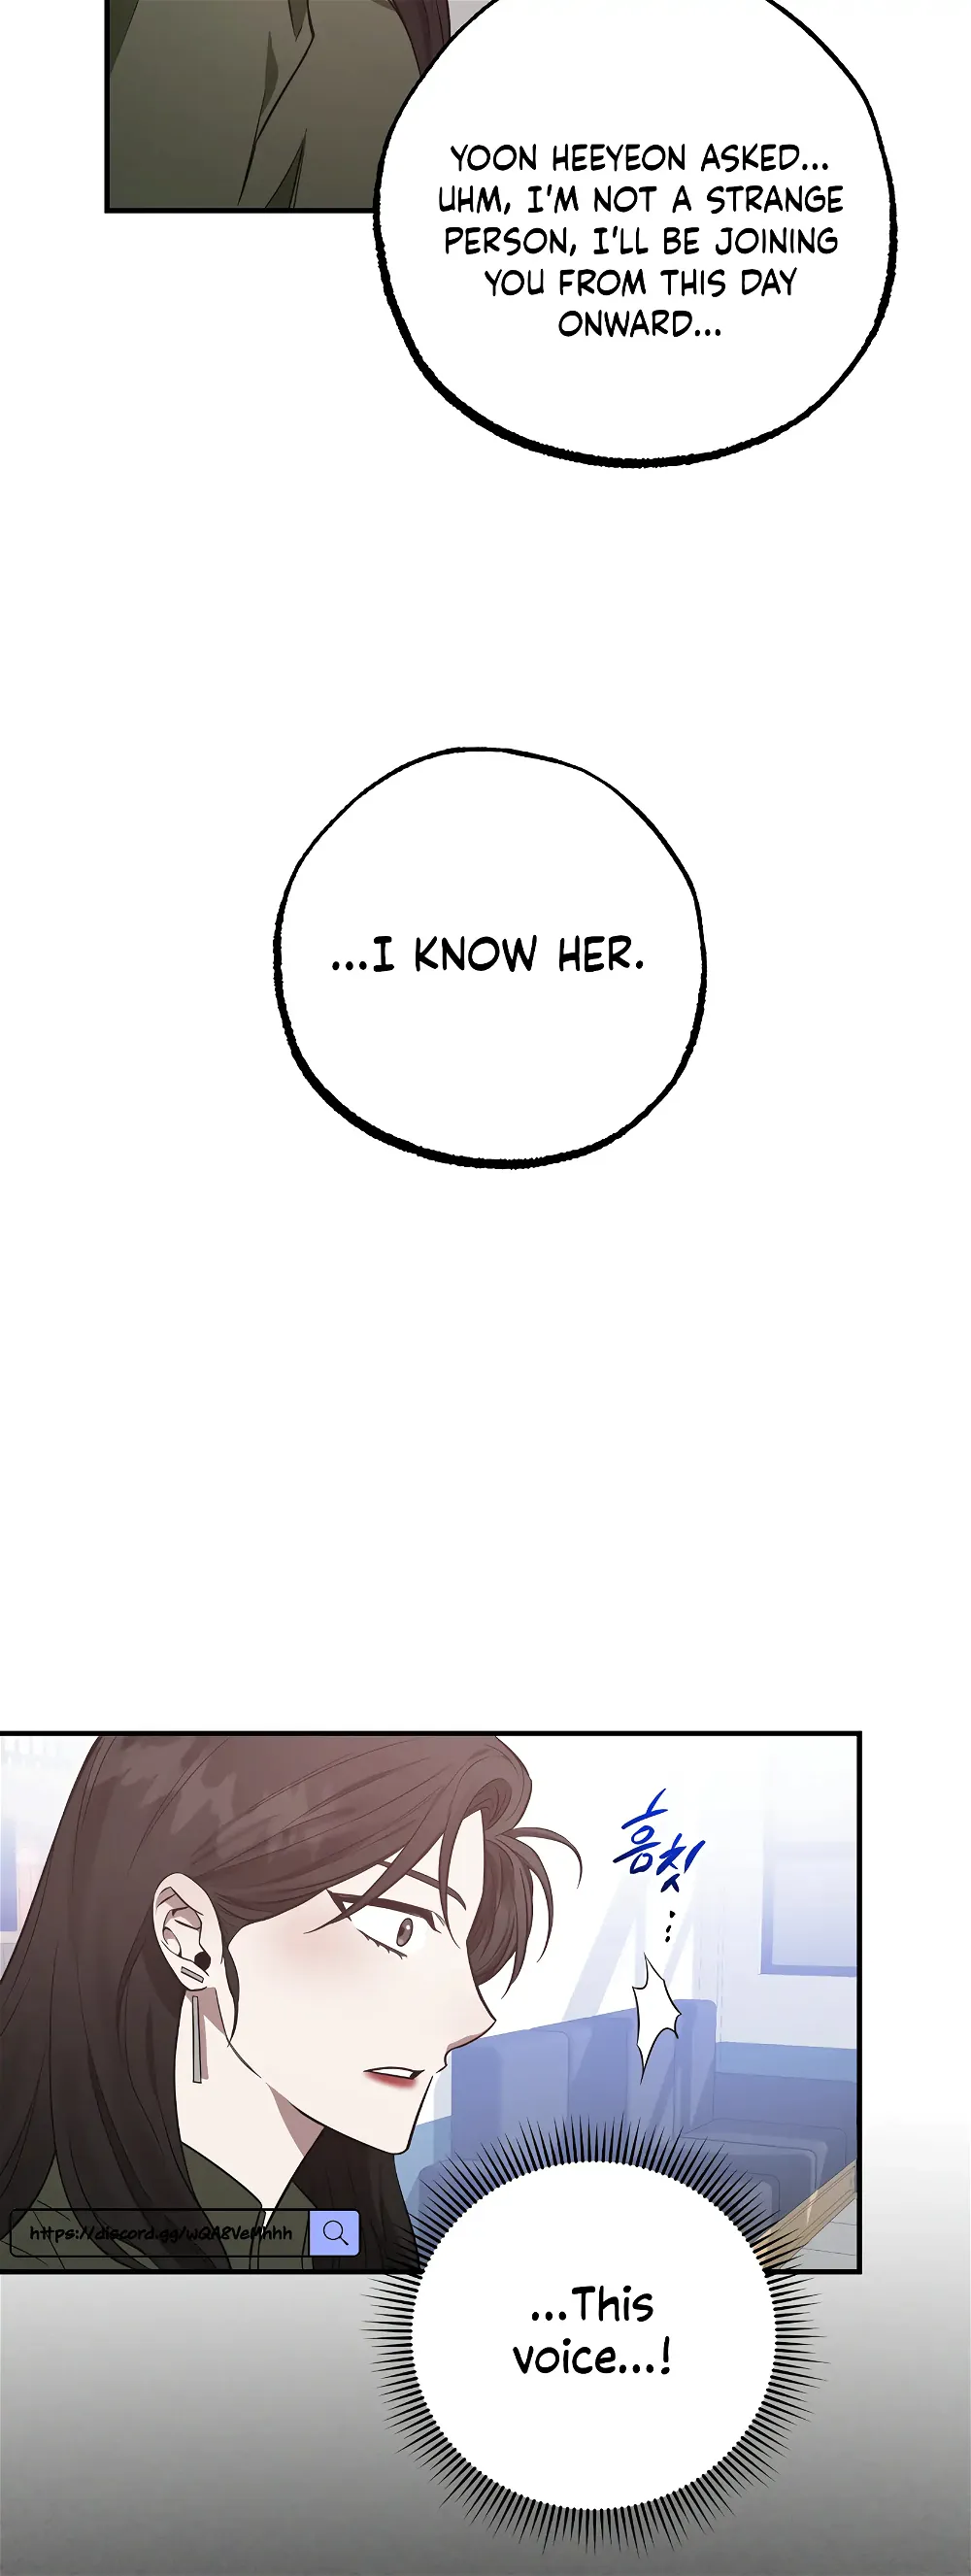 Mijeong’s Relationships chapter 4 - Page 26